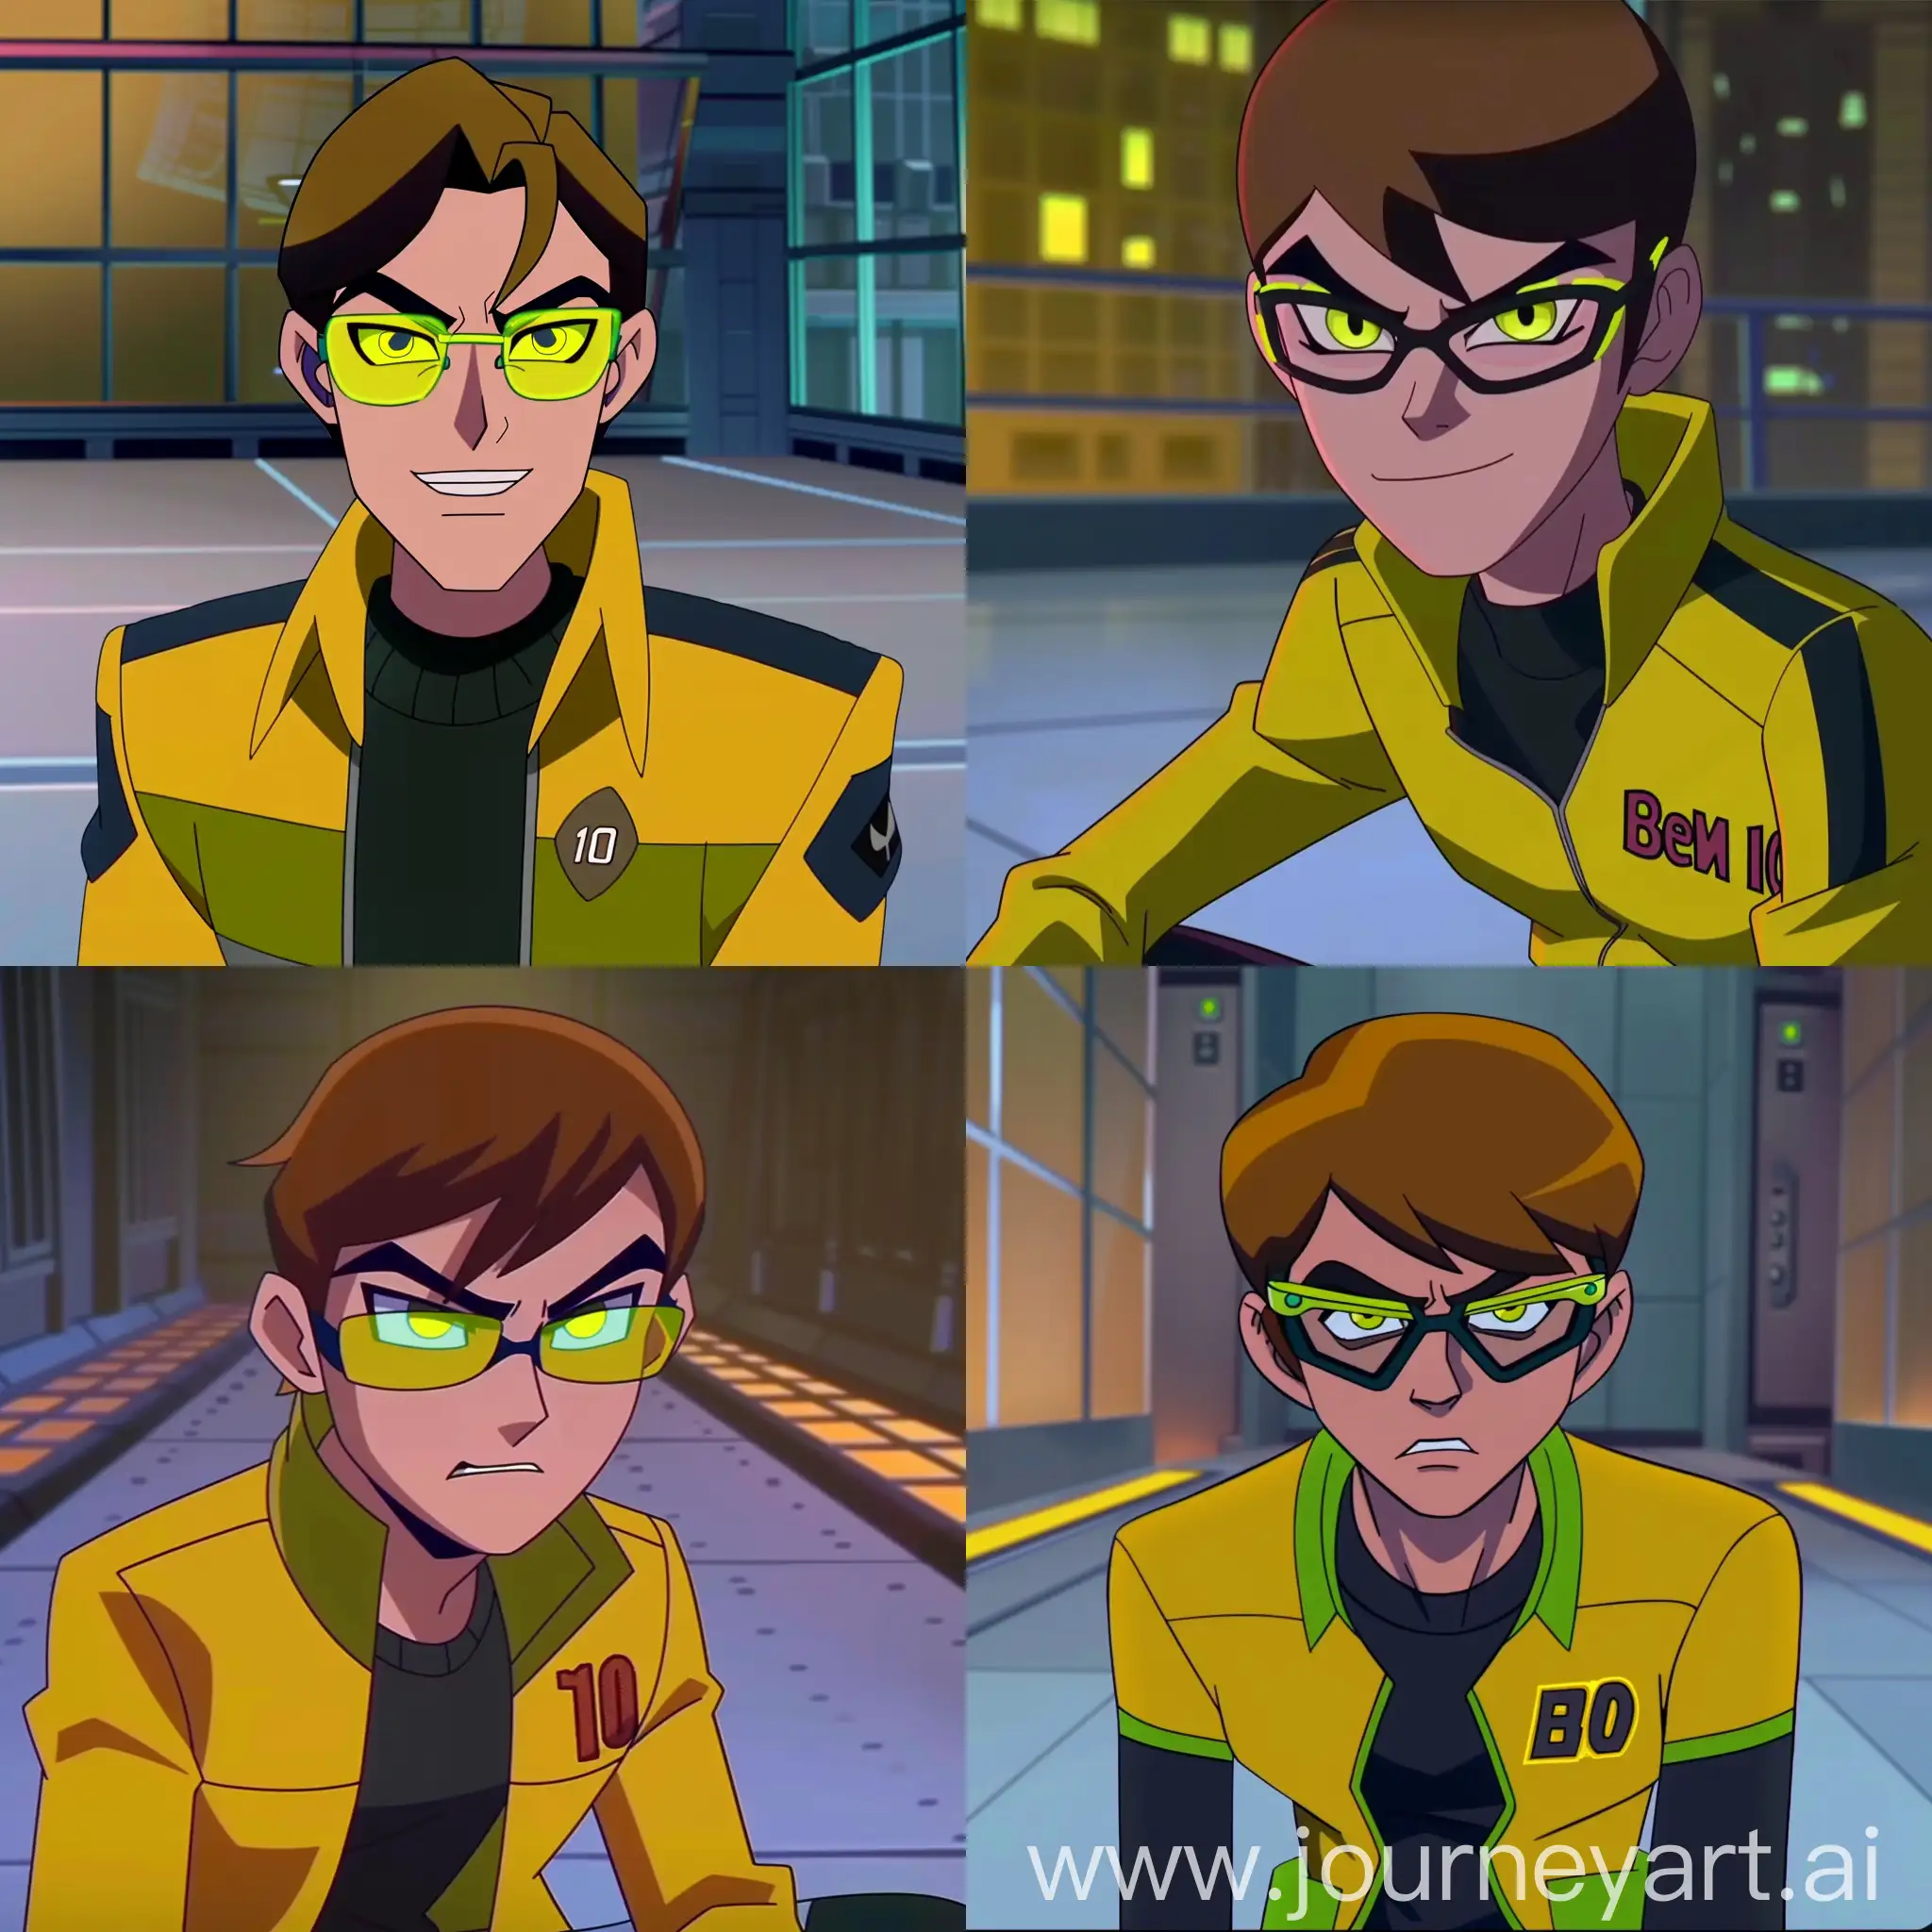 he's an animated character in the style of Man of Action[ben 10], he's handsome and has curved jawline, he is 5'11 in height and 60kg in weight. he wearing party glasses and he has yellow eyes, still is captured from front straight angle and it's a close camera shot with him smirking a little and "ben 10" is embroidered on his yellow jacket and black sweatshirt underneath. he's sitting on the empty hollow space with dim blur aesthetic background, portrait style,  --v 6  --sref https://cdn.discordapp.com/attachments/1215979386310889605/1216982884083040266/Picsart_24-03-08_22-57-05-471.jpg?ex=66025ea2&is=65efe9a2&hm=a3c3cd11df6f7a445bf1bb038220edc722e23bafed0277ddb6c2189fdd7132ea& <https://cdn.discordapp.com/attachments/1215979386310889605/1217016024080191539/dc0ea46ef4800245c6852fecdca3ec26.jpg?ex=66027d7f&is=65f0087f&hm=4dfeeb9c50c293884950e8ce0d8b37869a4a50faa0b9dc9468d263f56d640be5&>